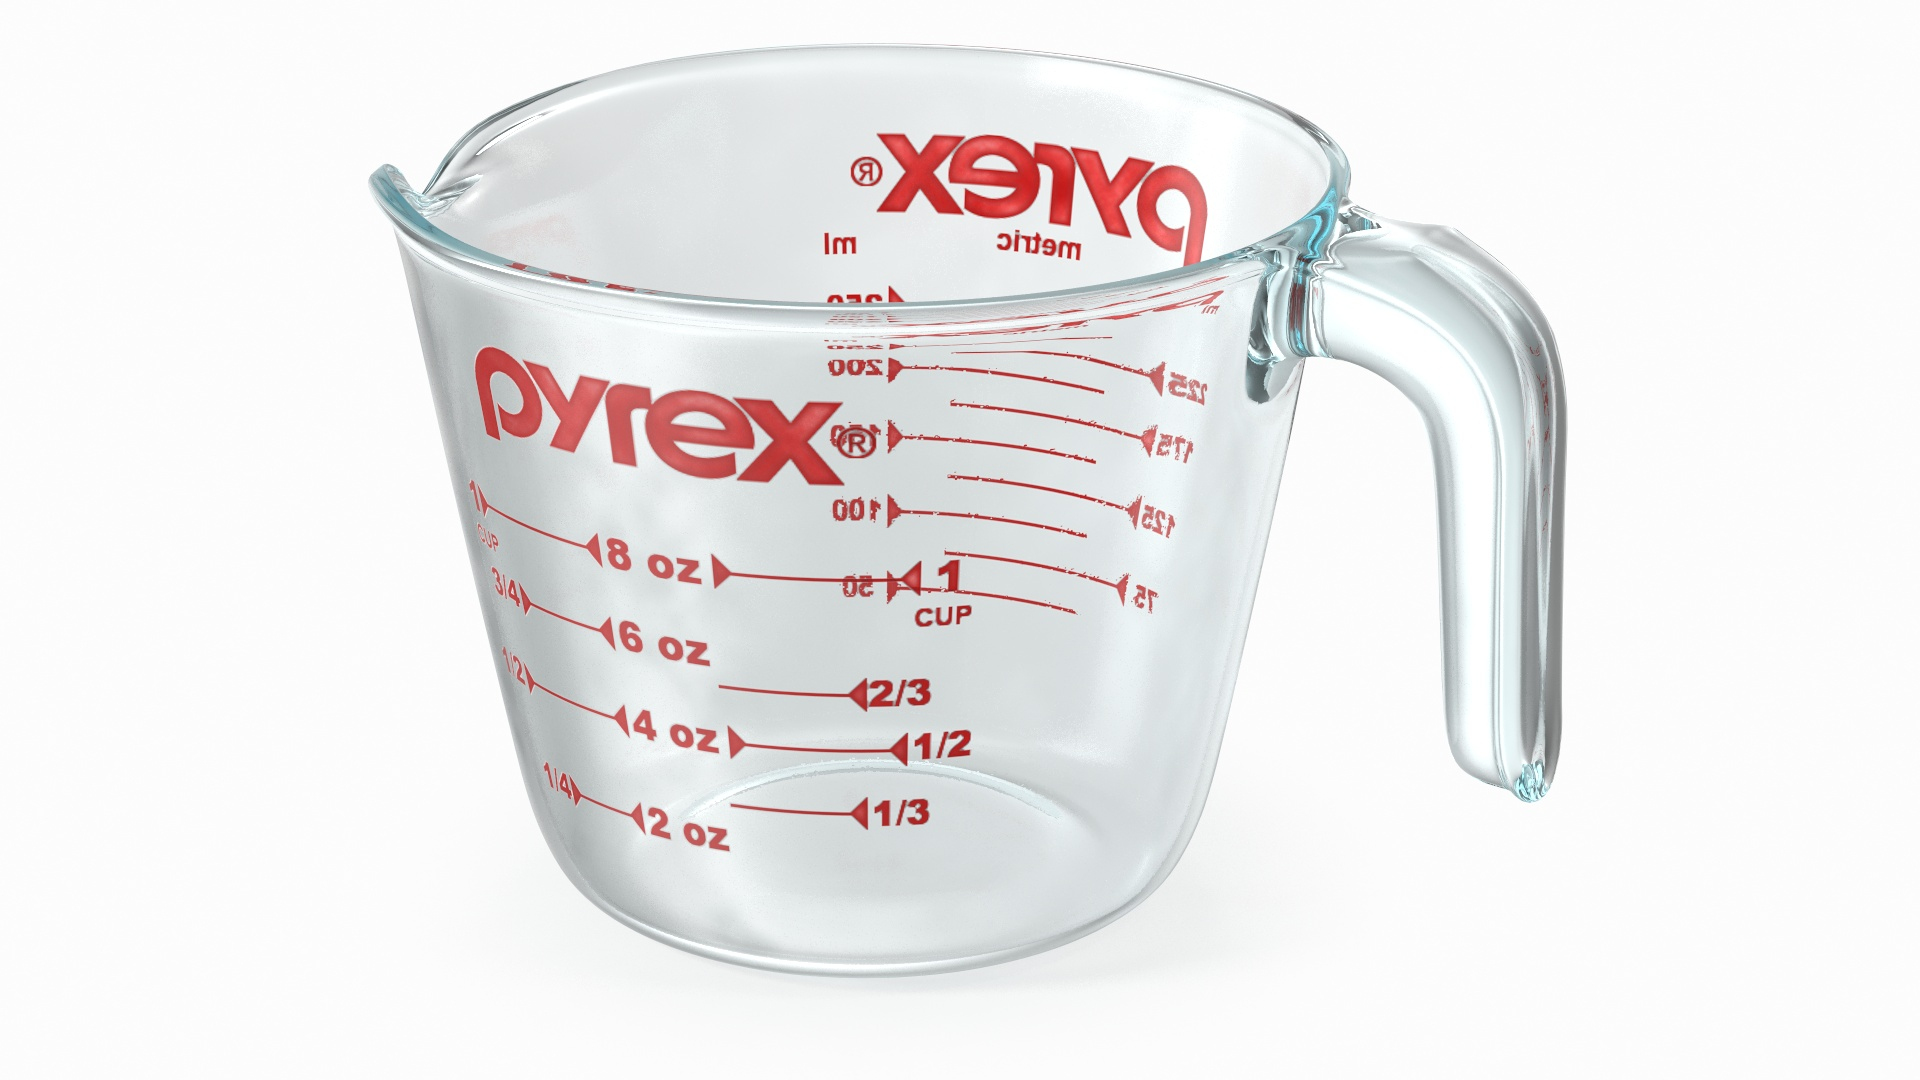 68,623 Measuring Cups Images, Stock Photos, 3D objects, & Vectors